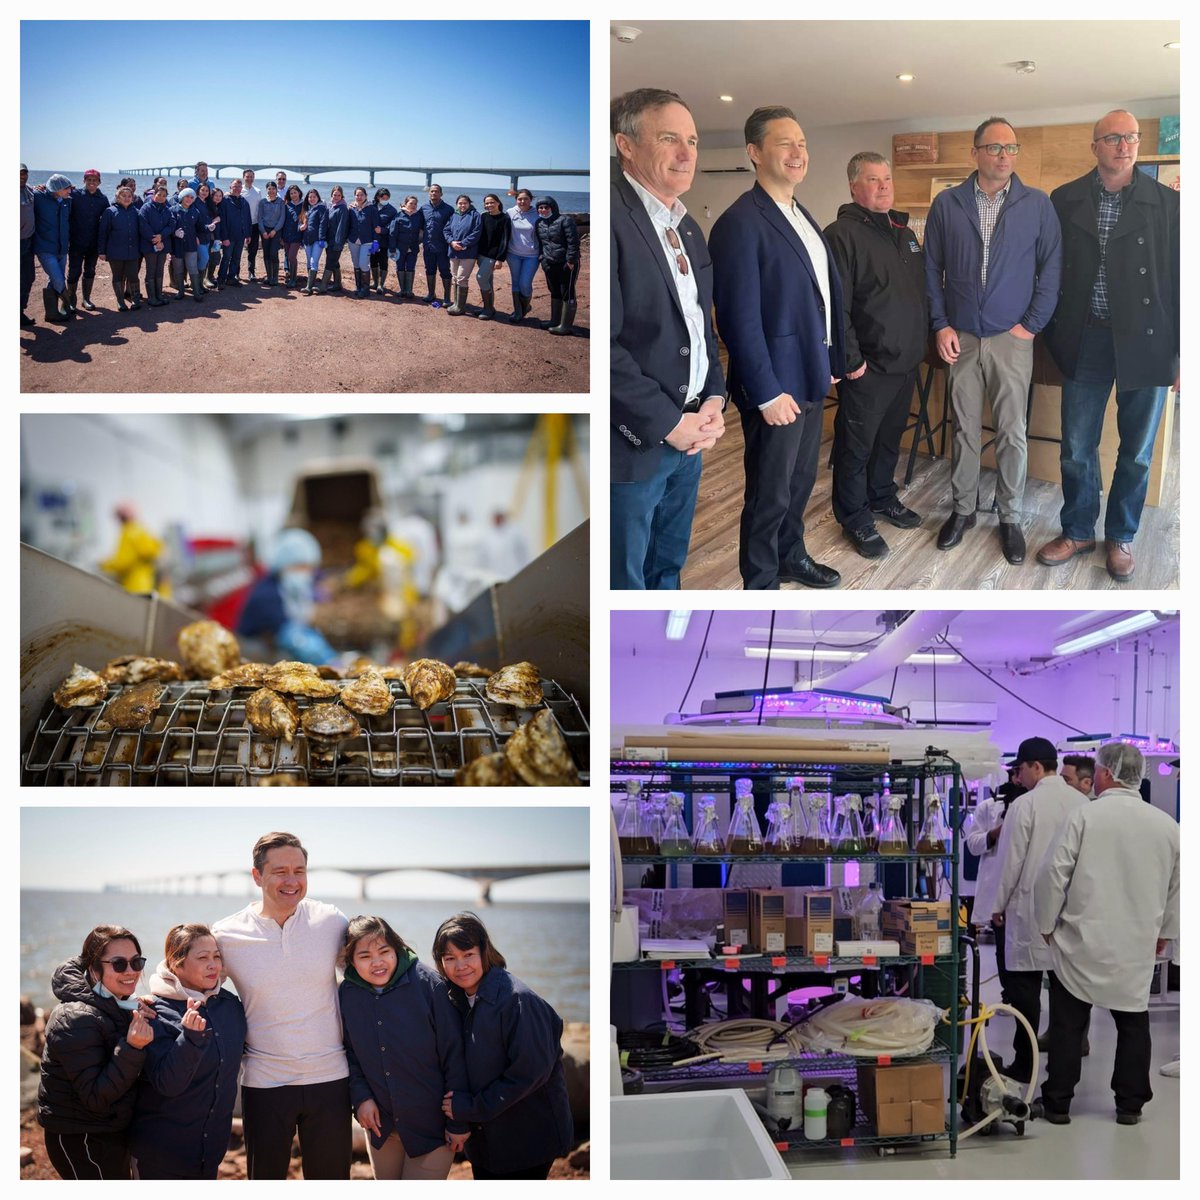 Over 35 yrs of providing oysters & mussels to the world and @PierrePoilievre got to experience a taste of it. PEI is a leader in quality aquaculture and seafood. @atlanticaquafarms @CPC_HQ #foxformalpeque